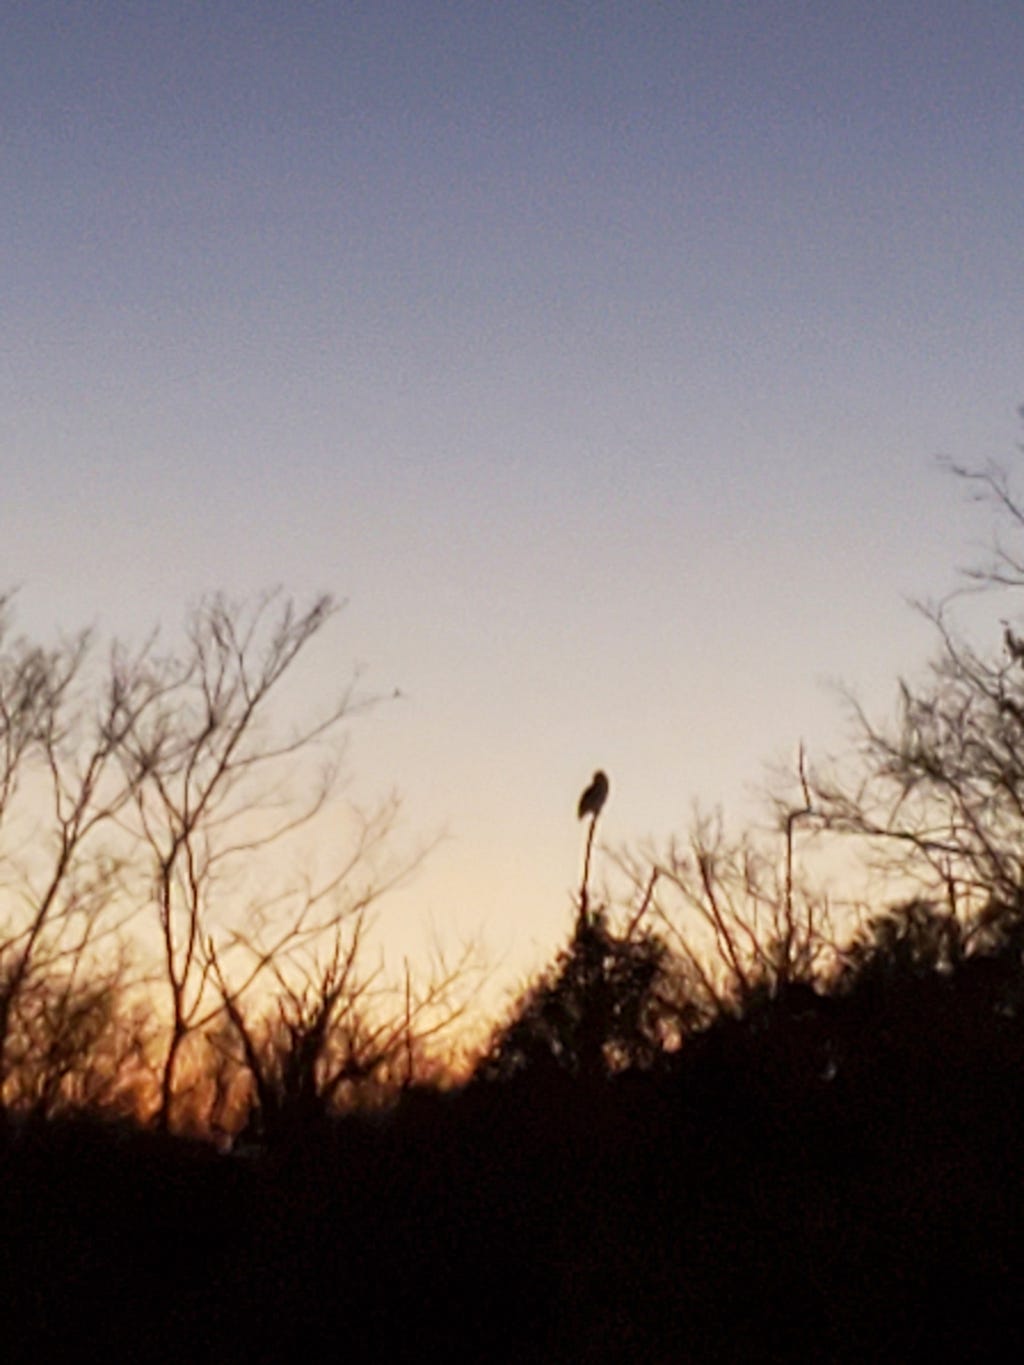 The black outline of a Great Horned Owl perched on a tall branch in a wooded area at dusk.